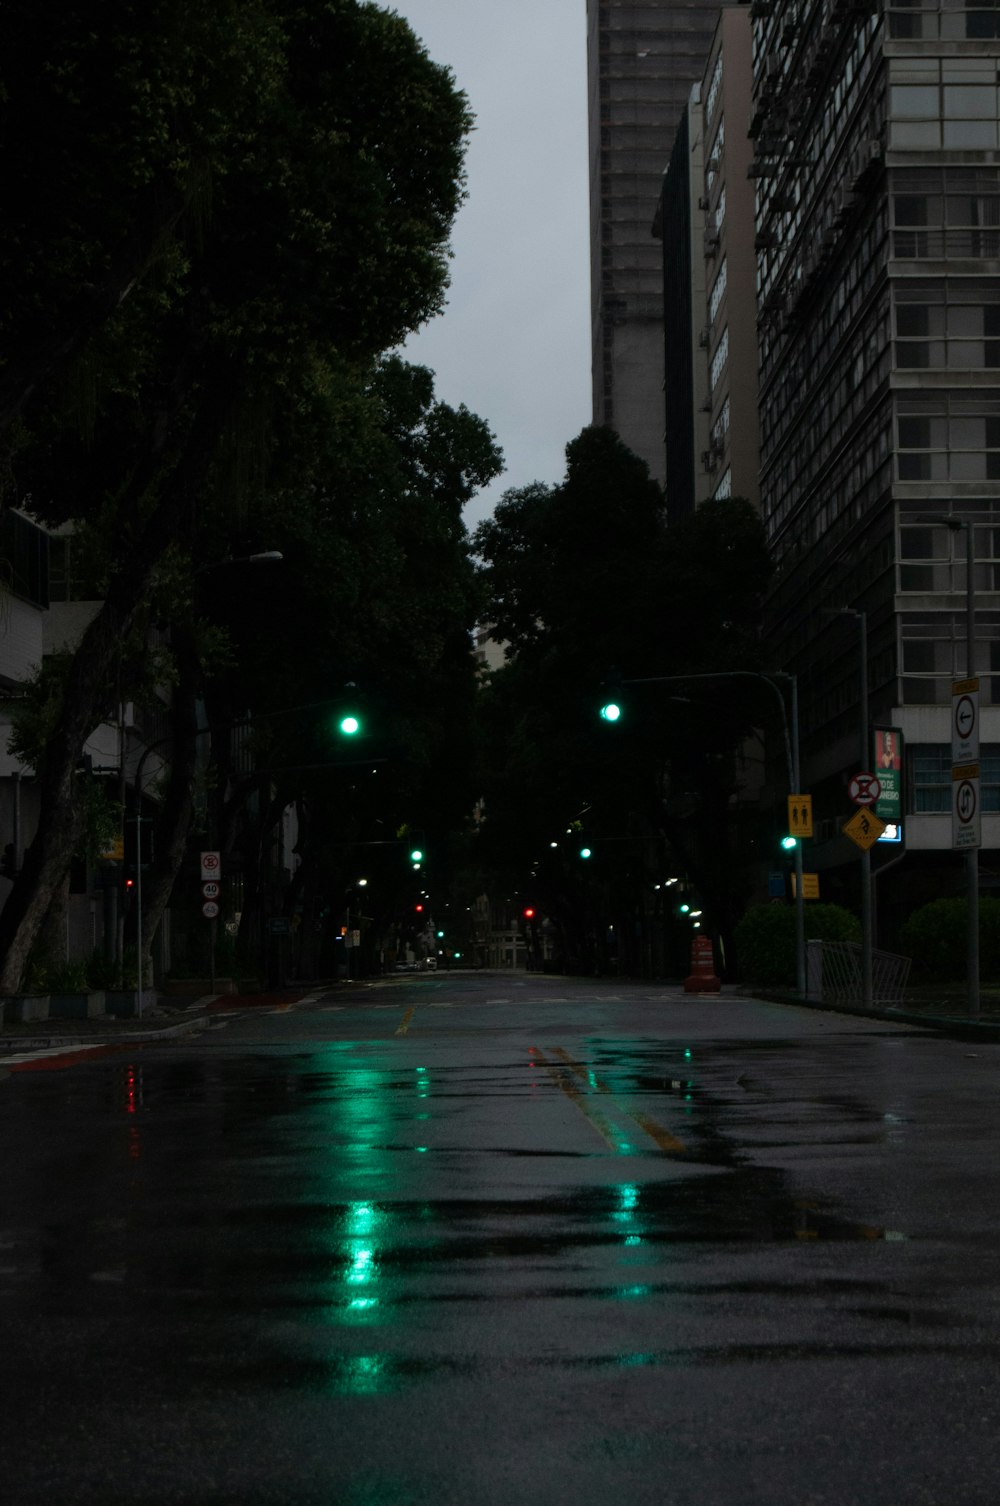 a city street at night with green street lights